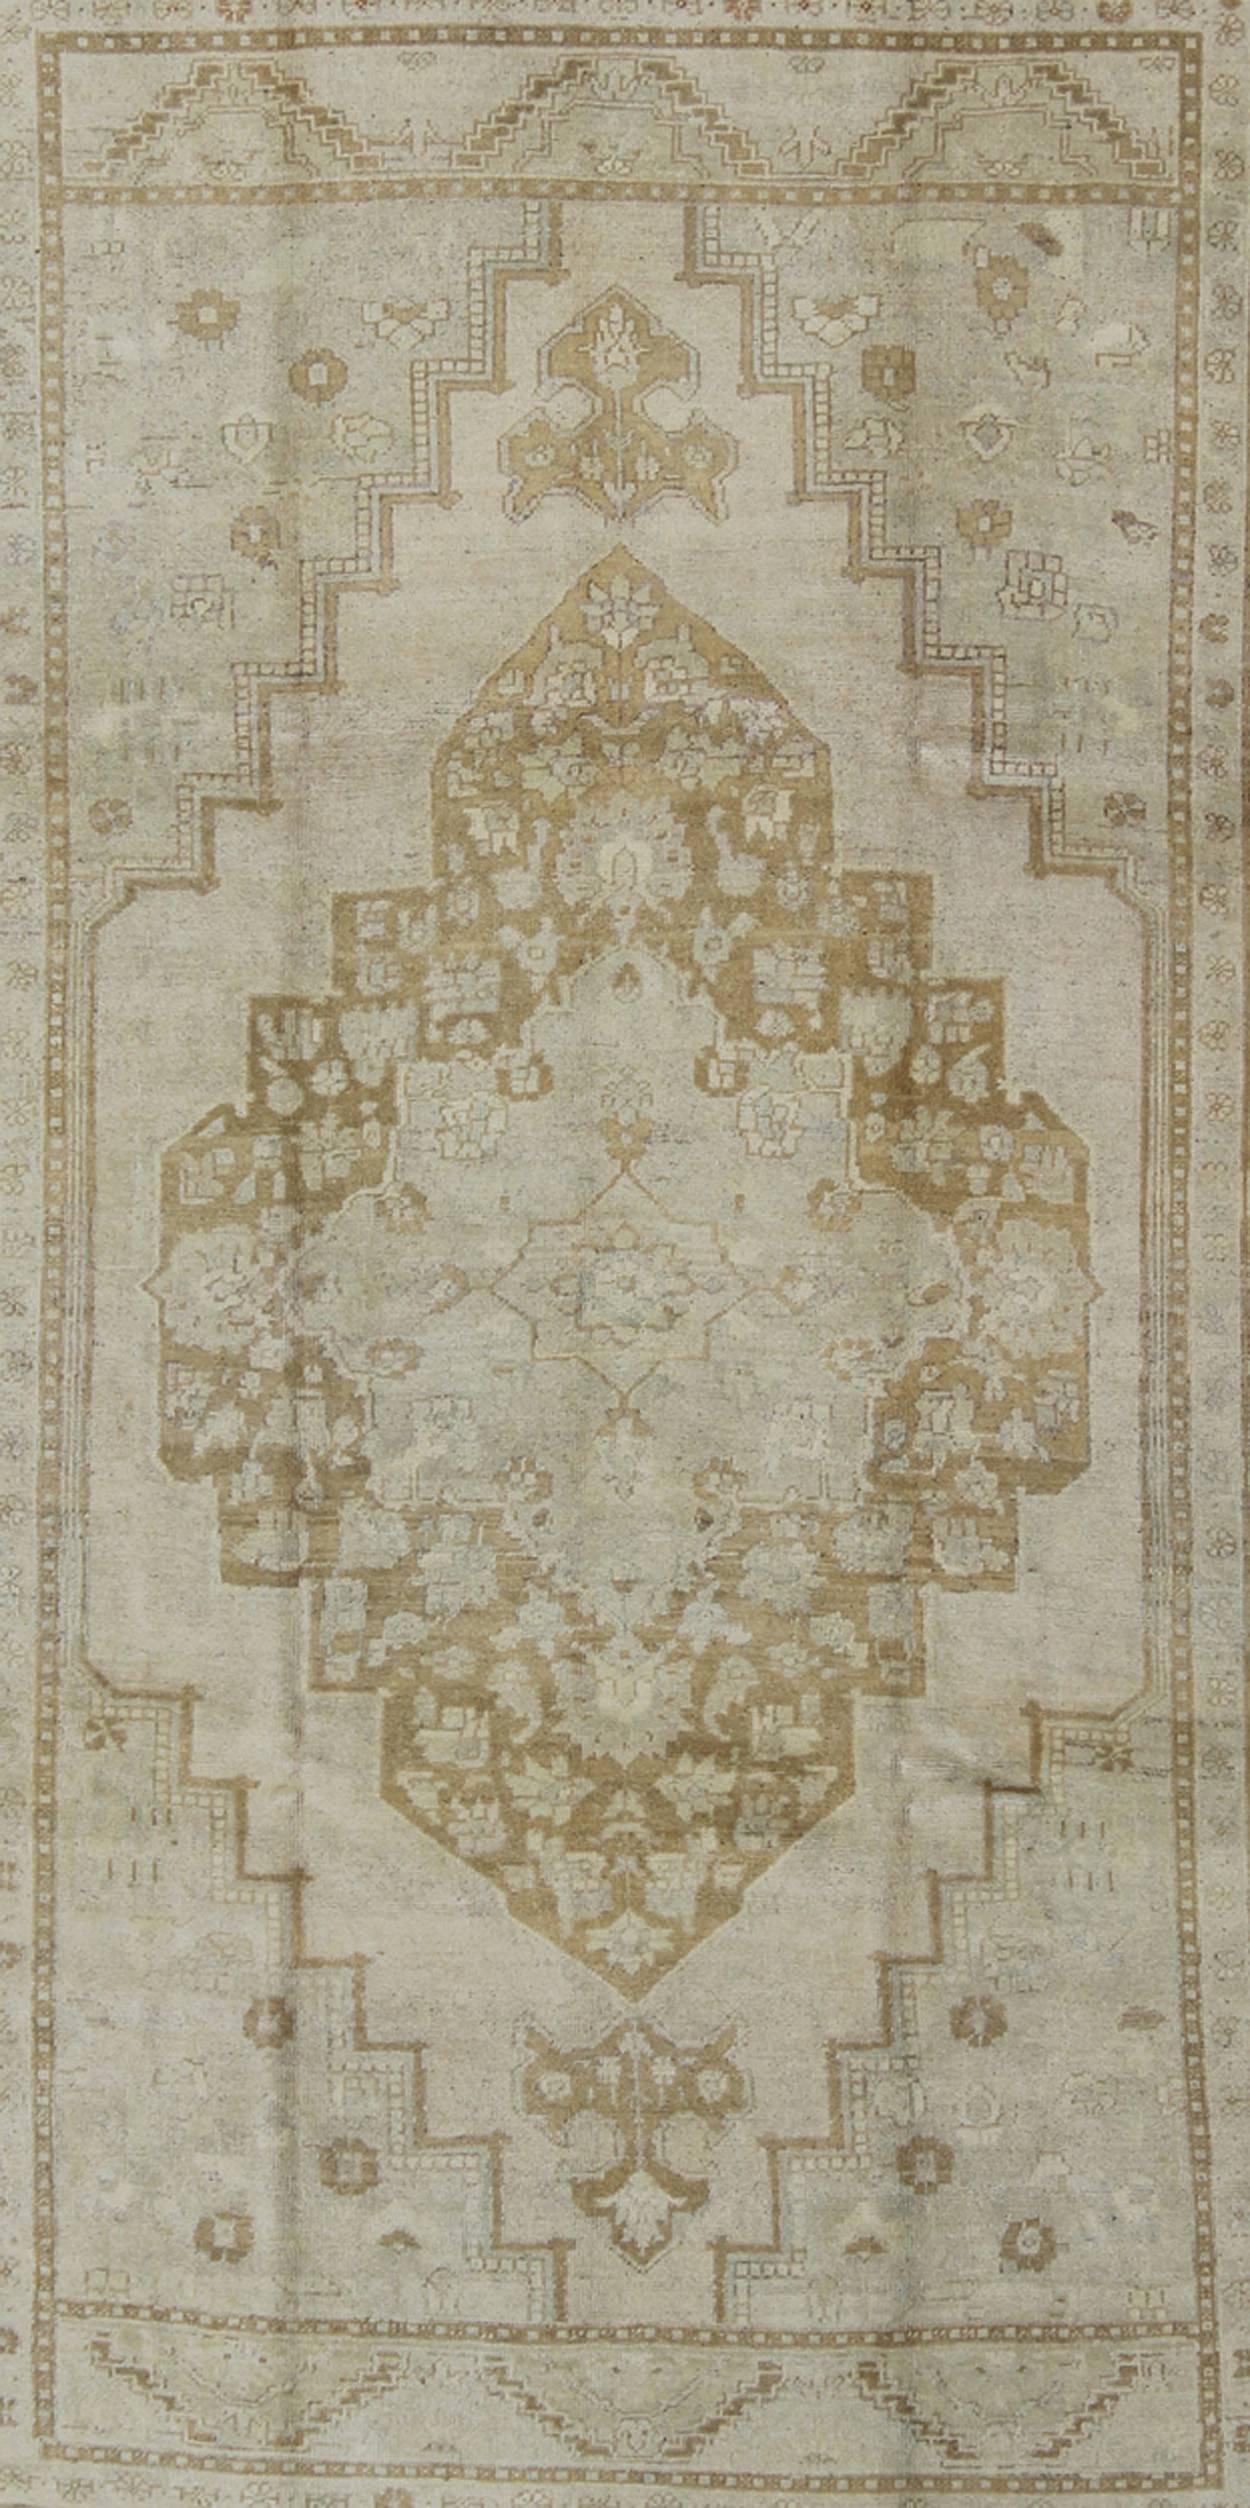 Pale Colored Vintage Turkish Oushak Rug in Gray, Taupe, Cream and Light Brown In Good Condition For Sale In Atlanta, GA